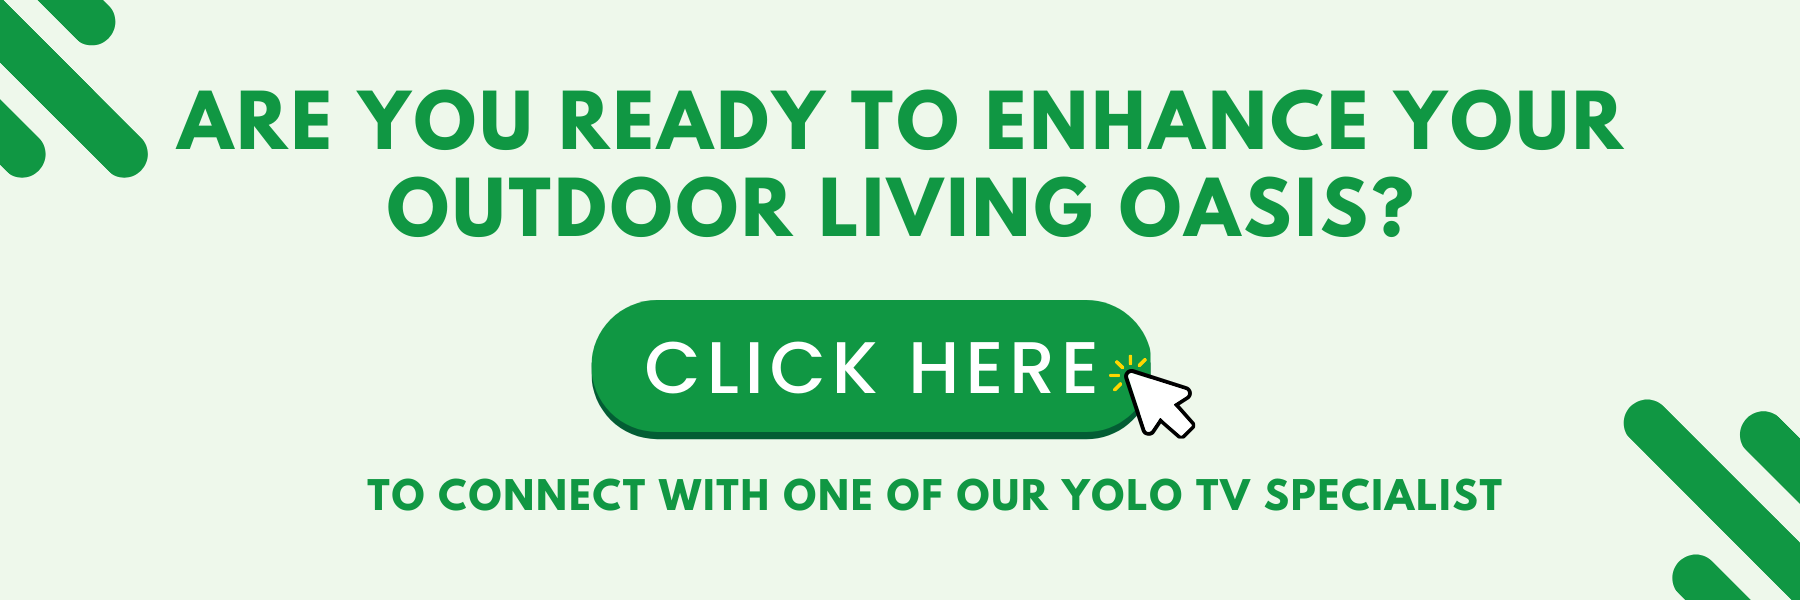 YOLO TV Featured Project